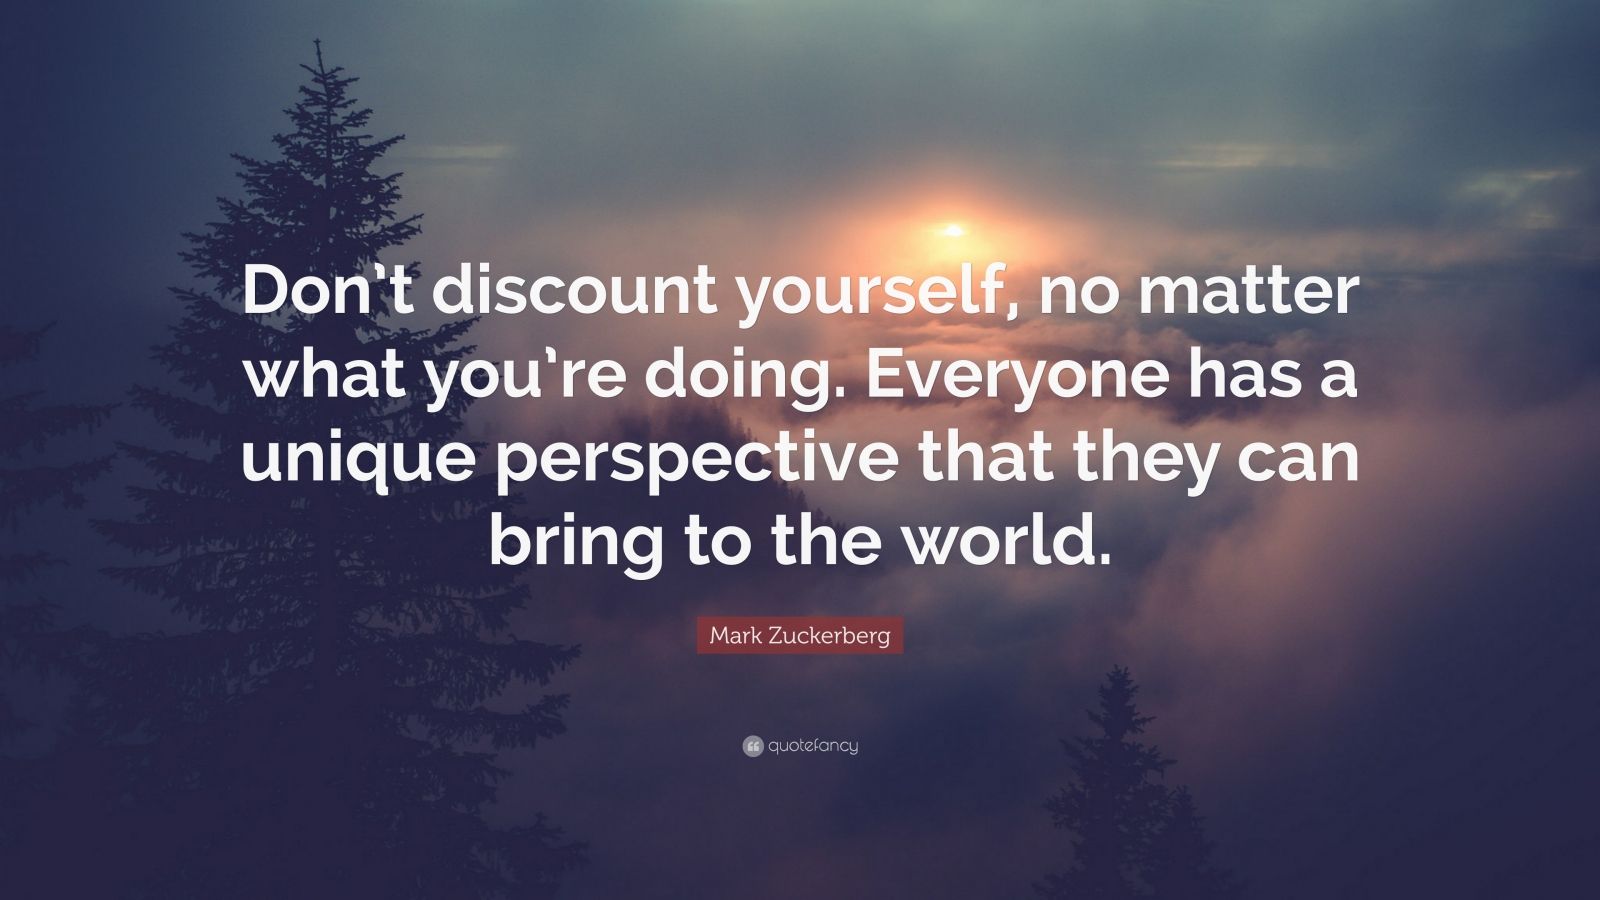 Mark Zuckerberg Quote: “Don’t discount yourself, no matter what you’re ...